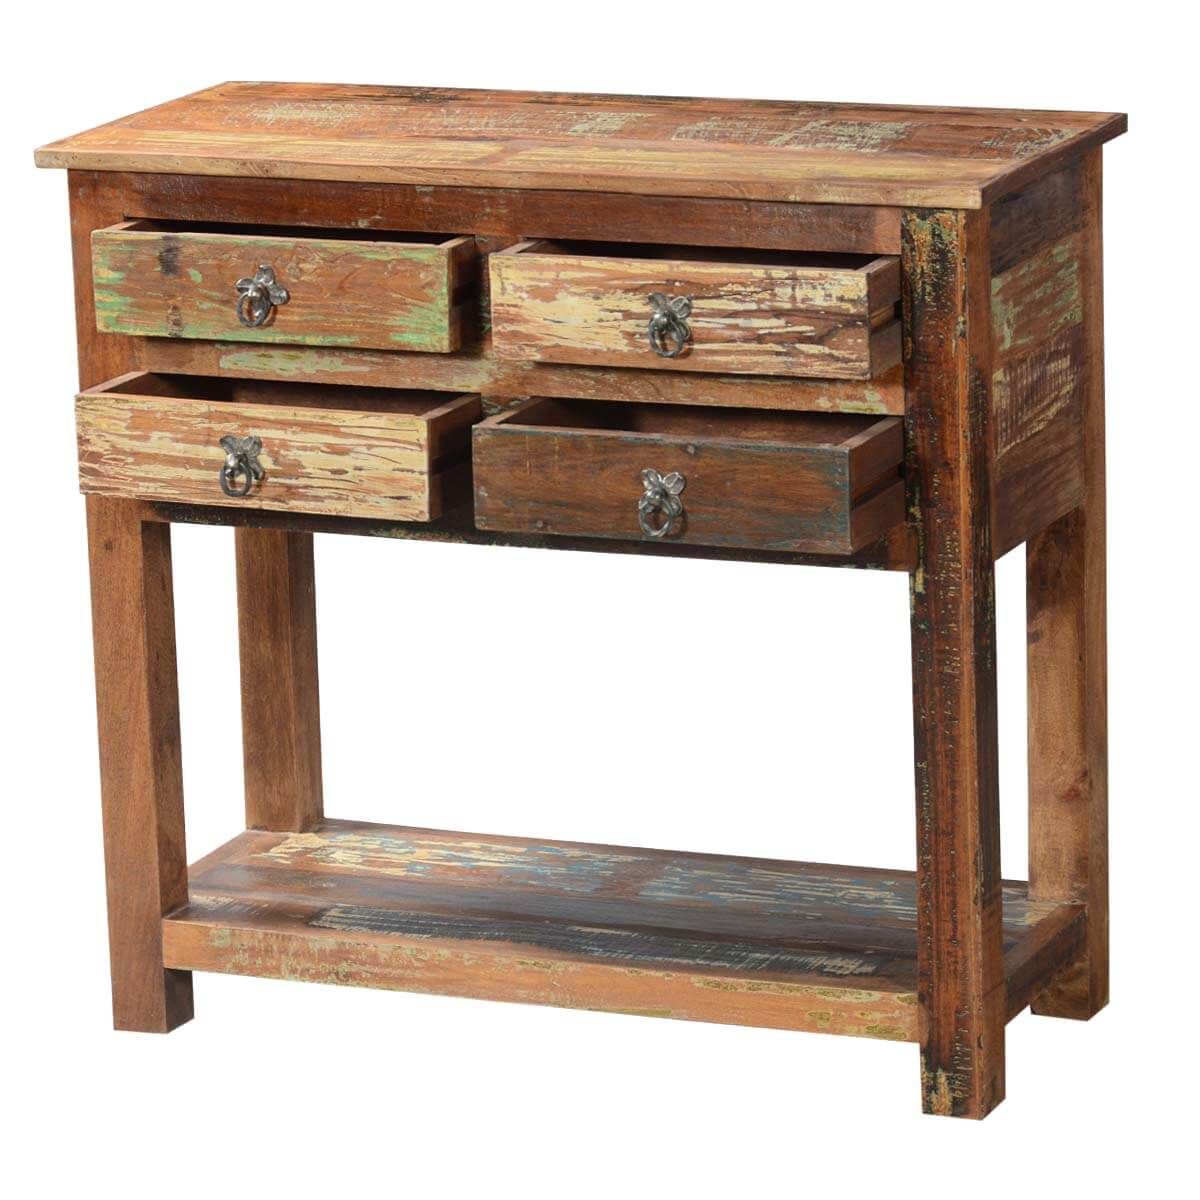 Ashland Rustic Reclaimed Wood 4 Drawer Hallway Console Table With Rustic Walnut Wood Console Tables (Gallery 19 of 20)